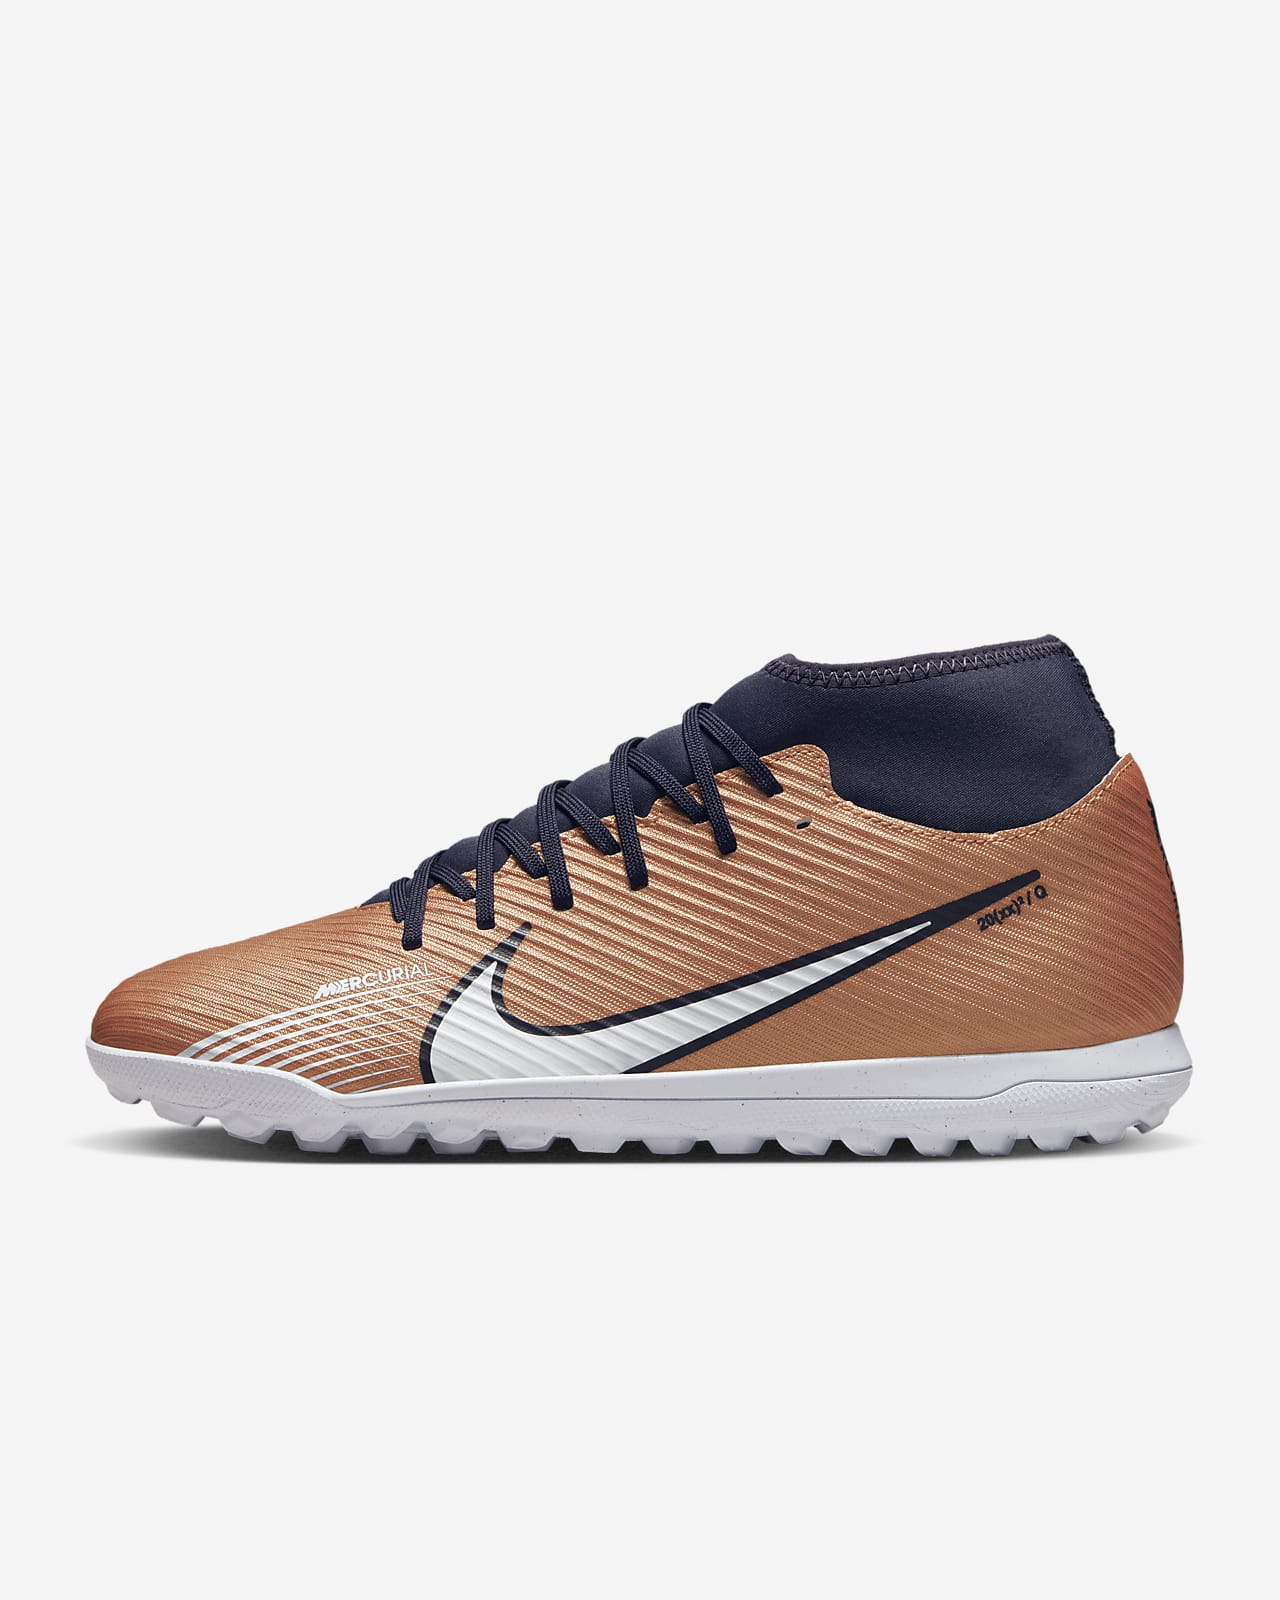 Chaussure de football pour surface synthétique Nike Mercurial Superfly 9 Club TF